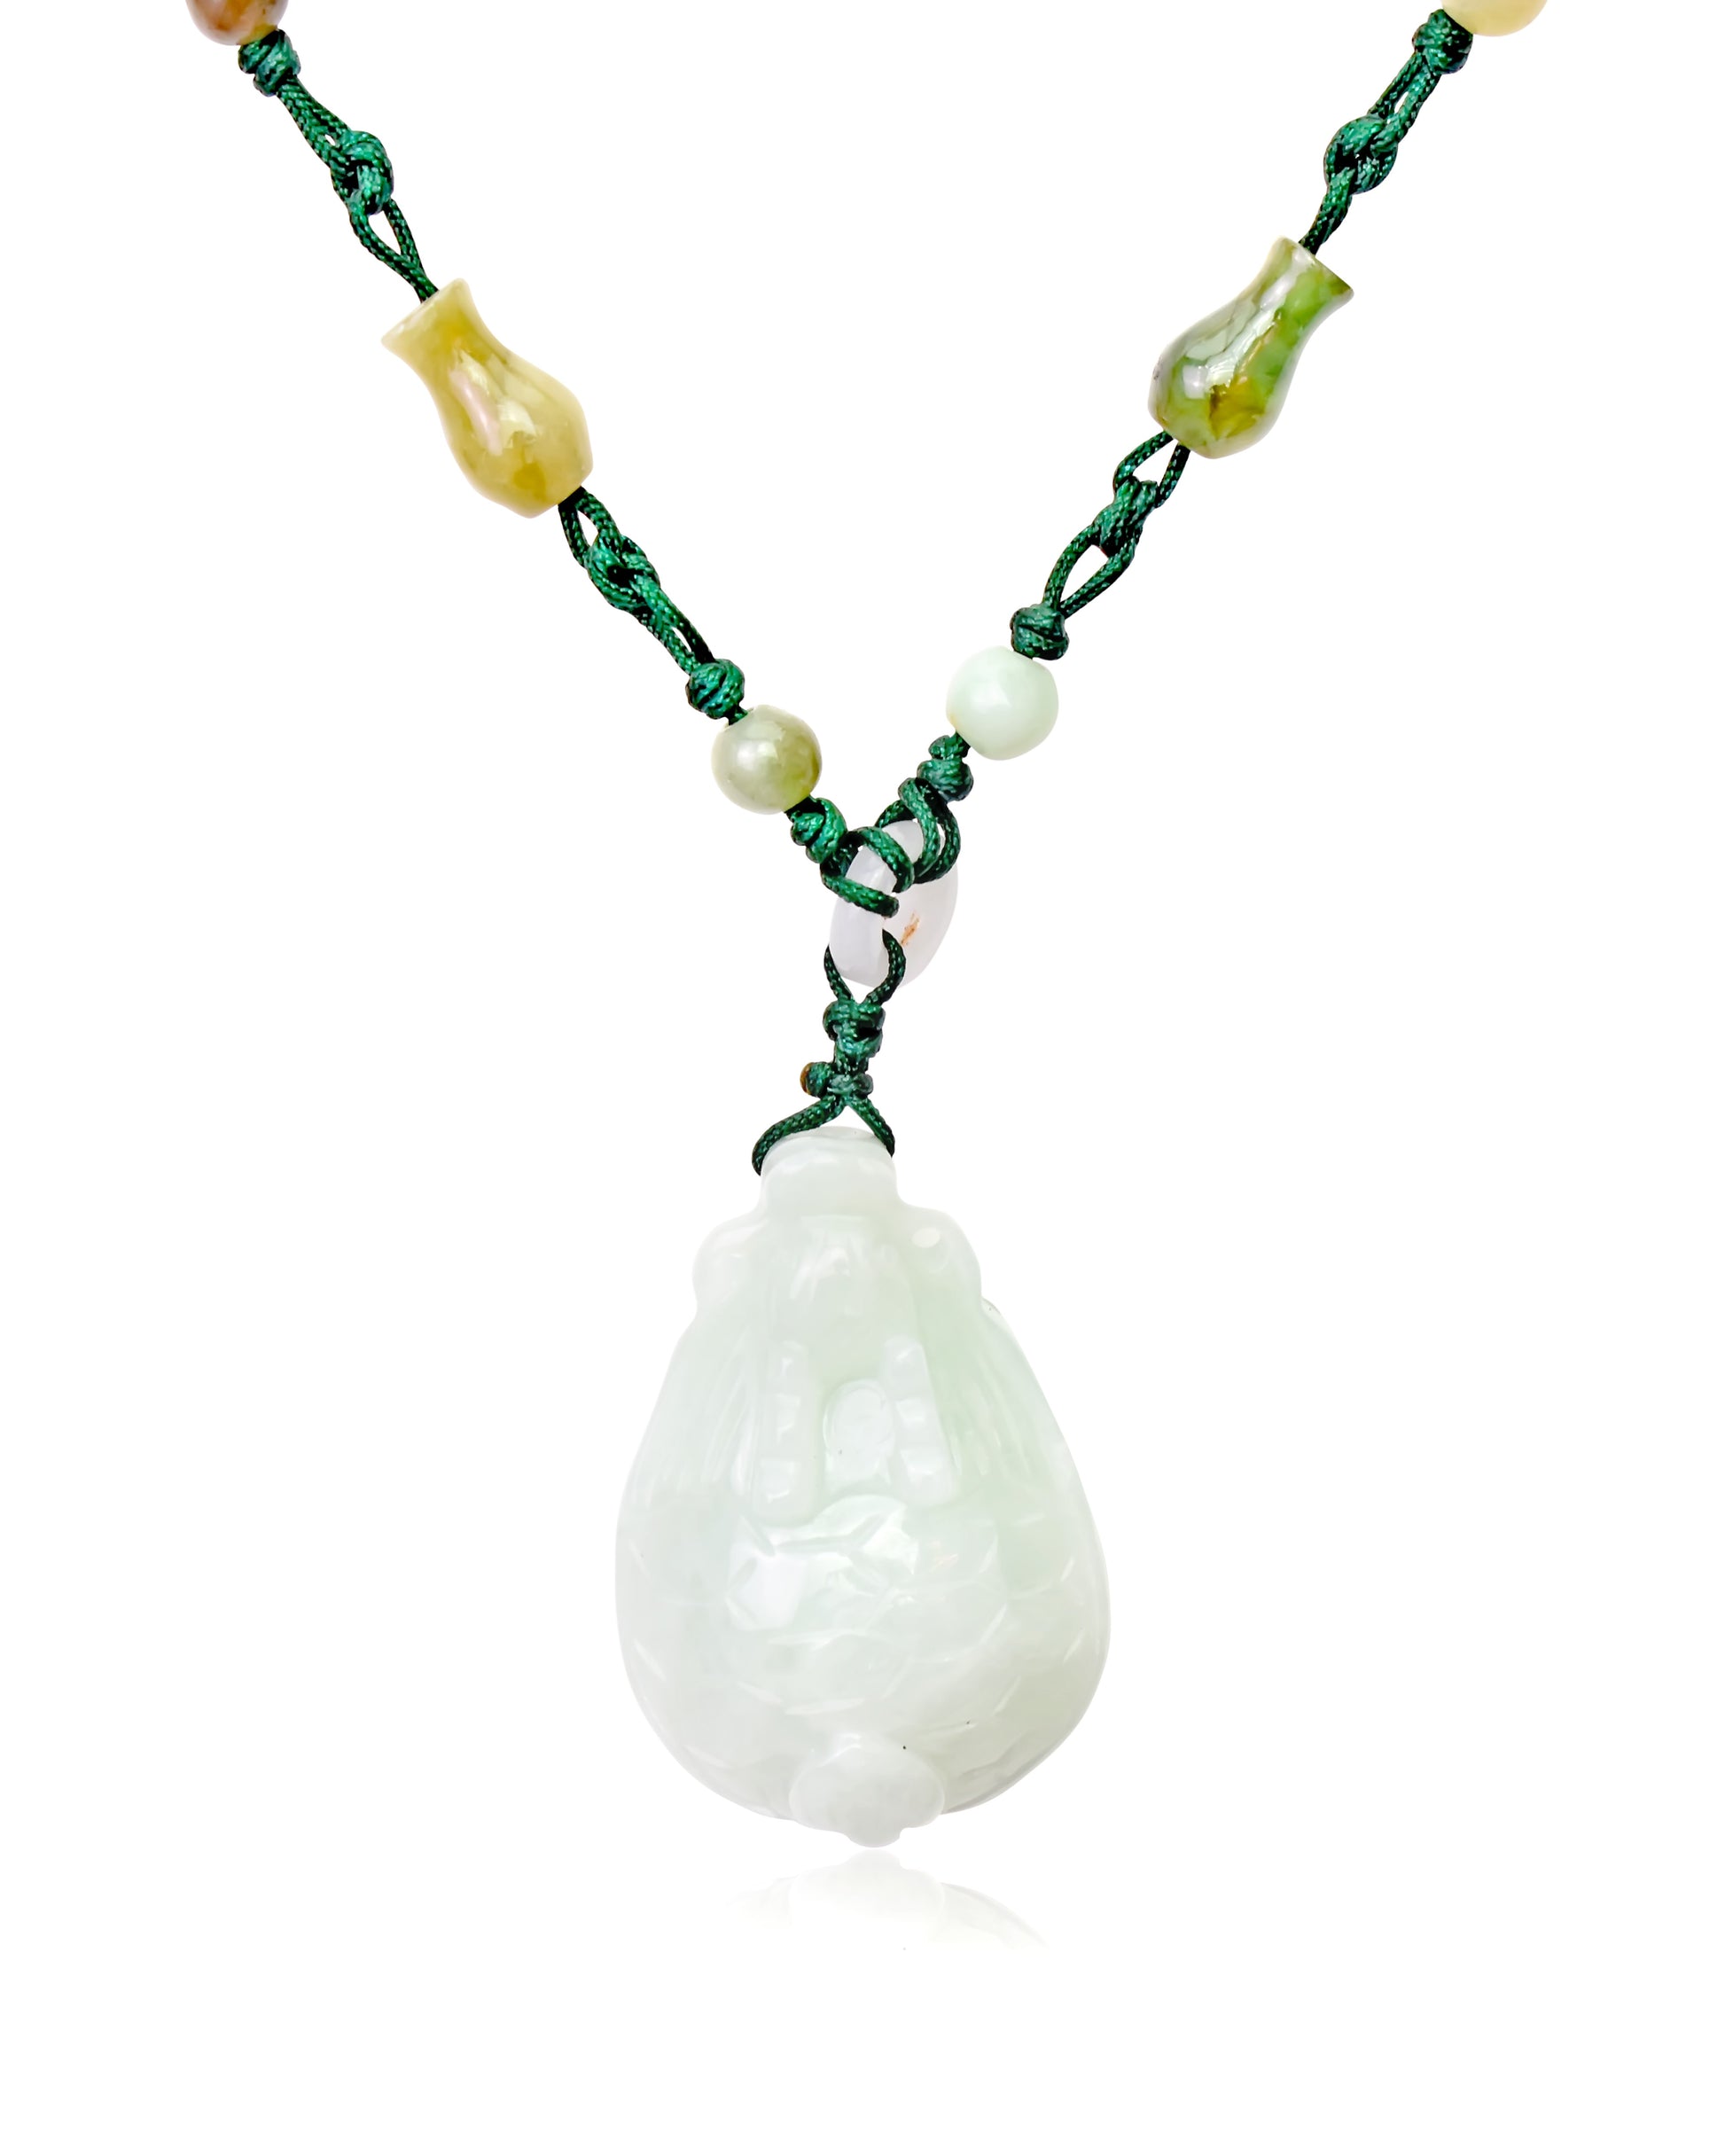 Enhance Your Life with a Dragon in Turtle Shell Jade Necklace